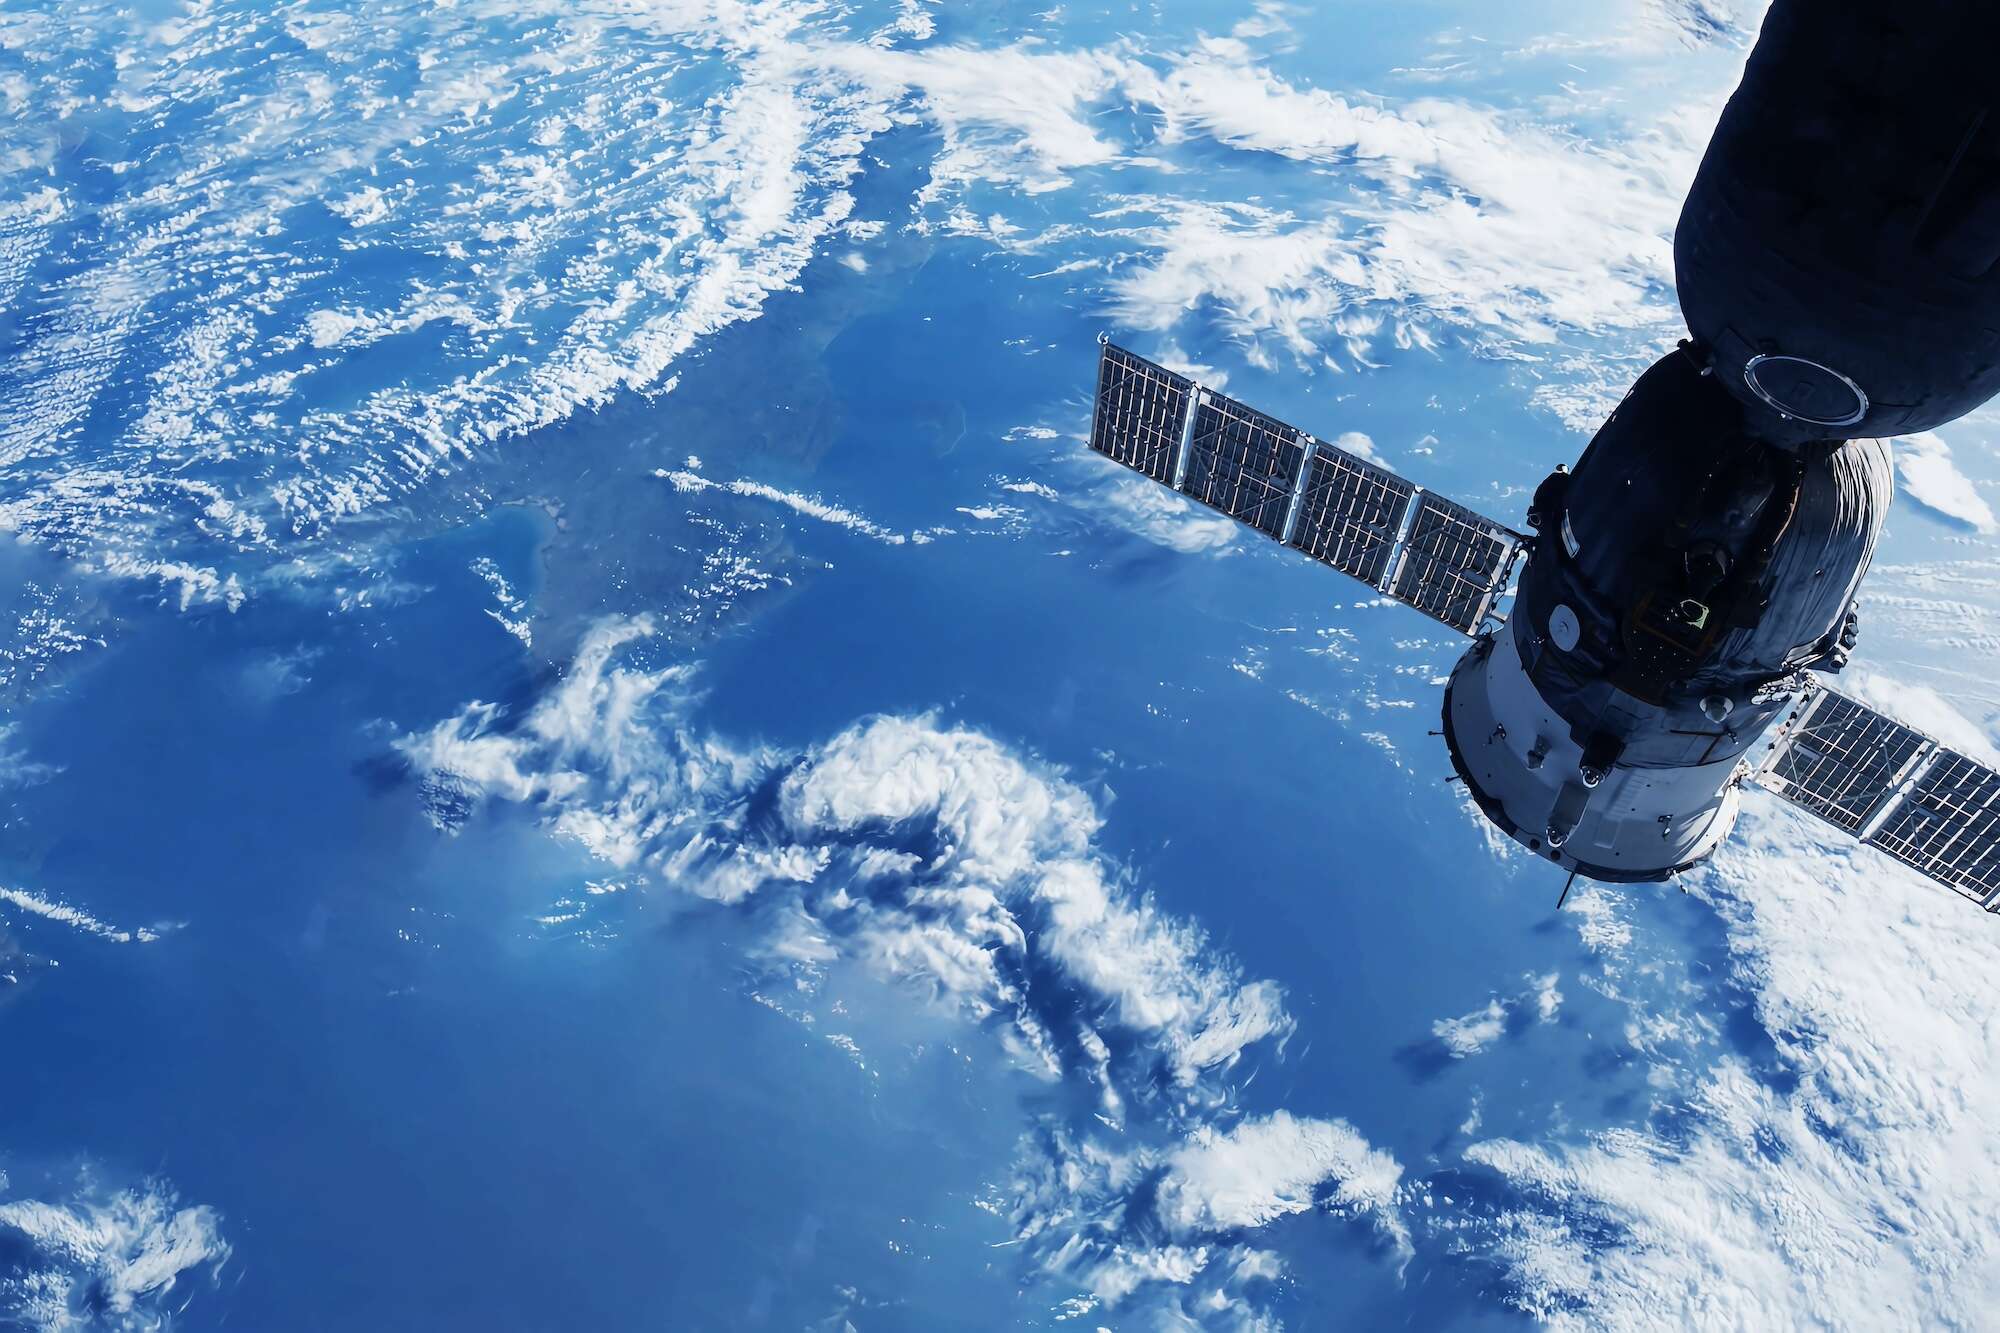 UK Space Agency launches scheme to help more businesses access satellite data